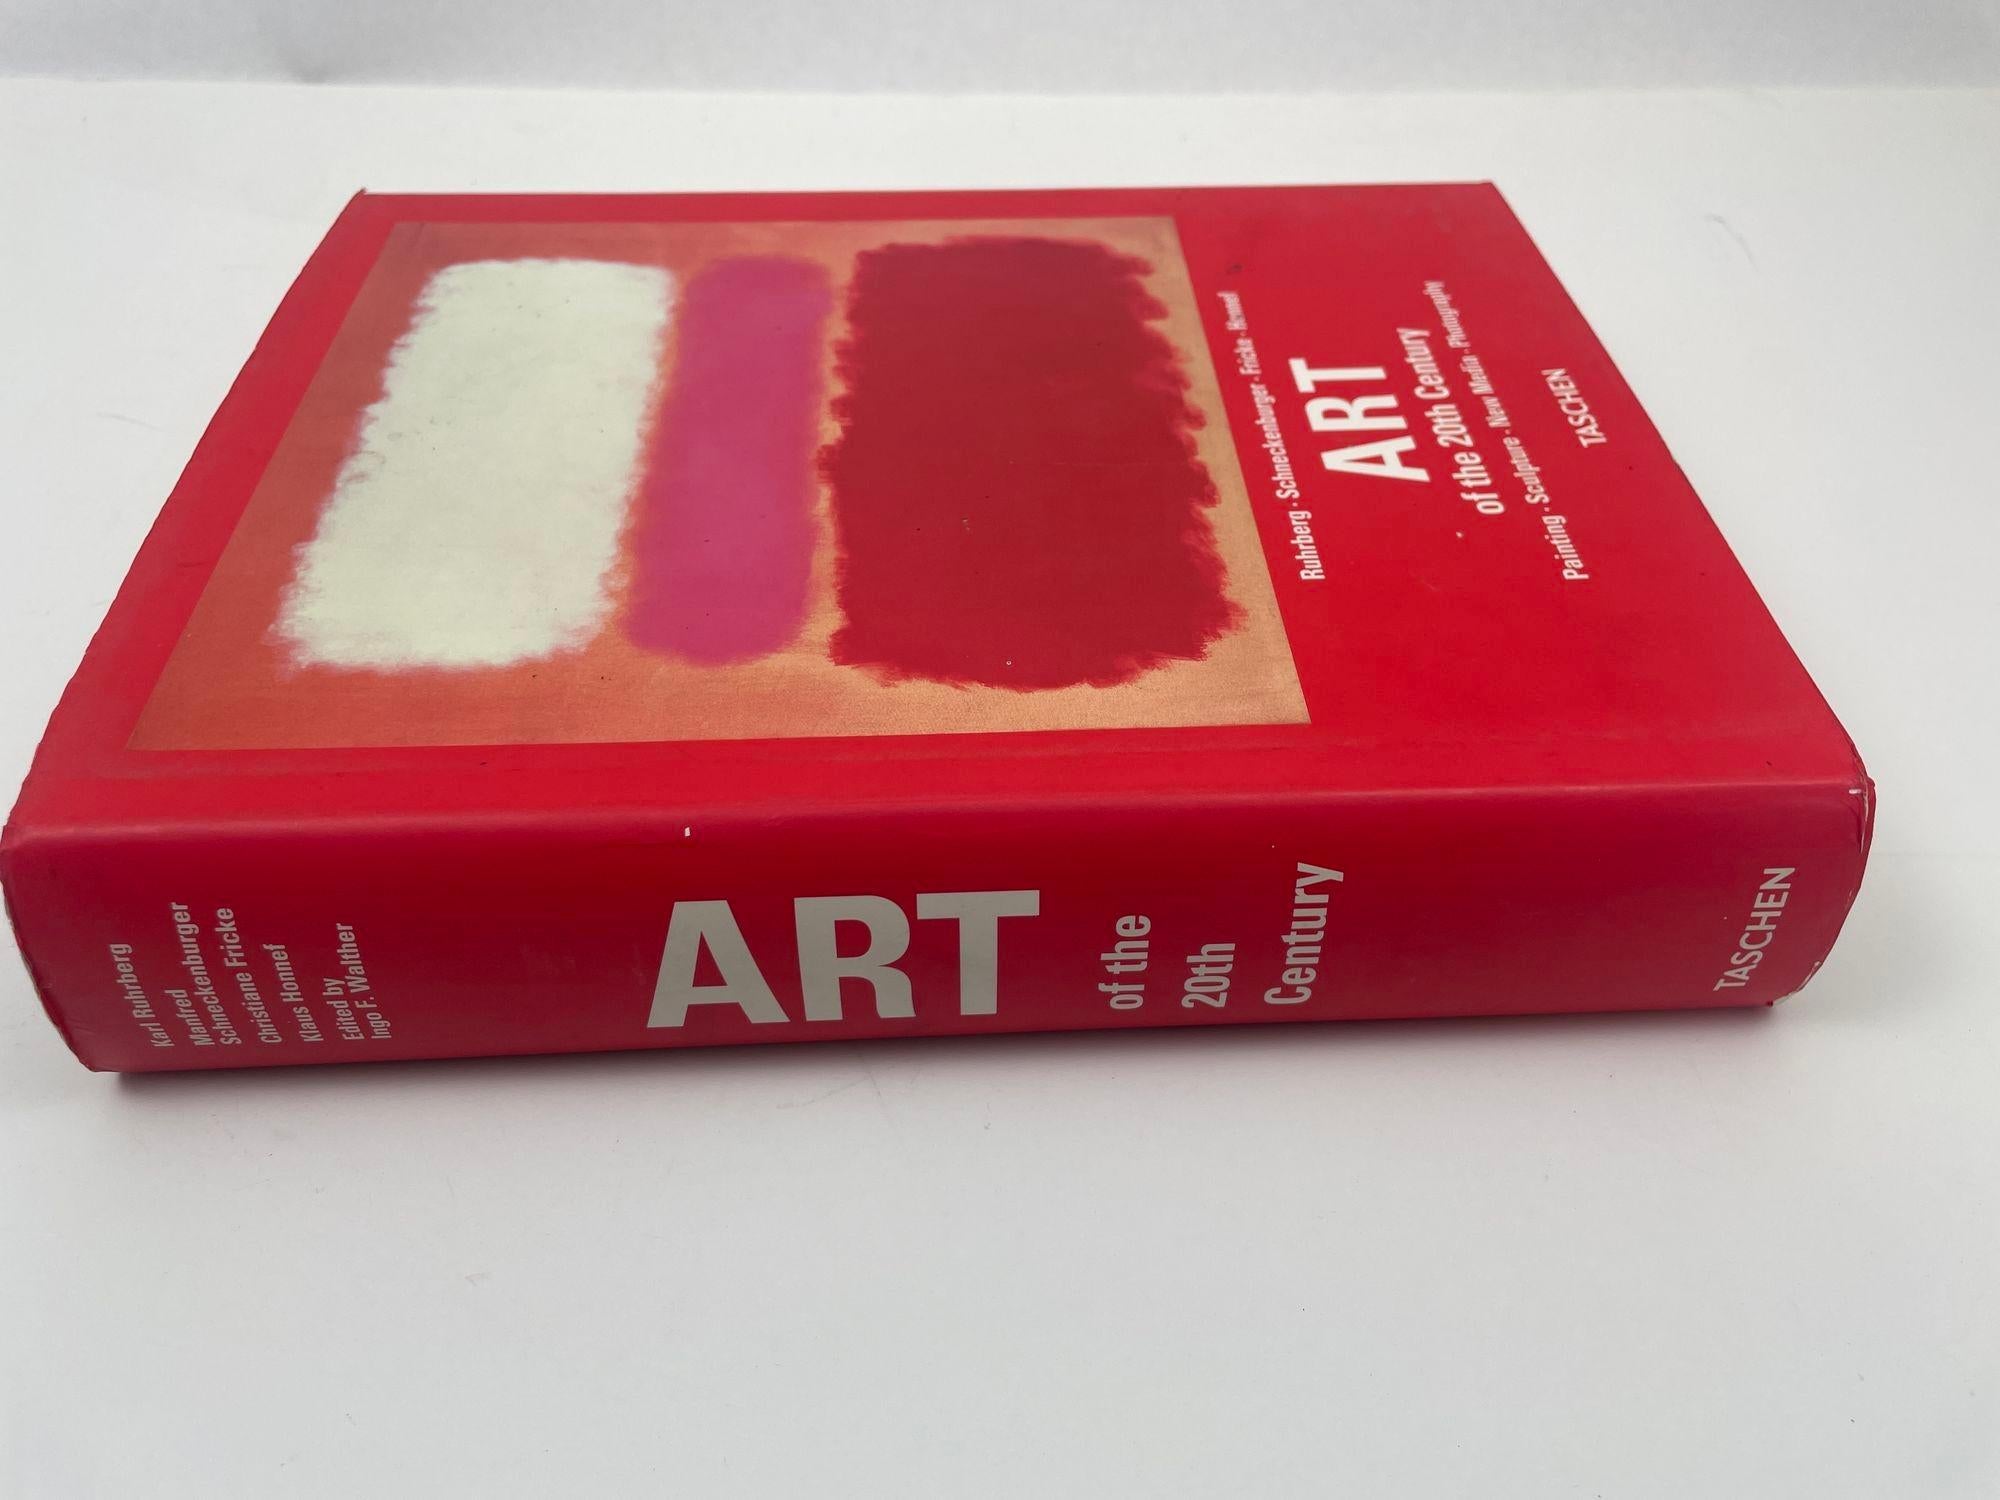 German Art of the 20th Century Vol. I Hardcover Taschen 2012 For Sale